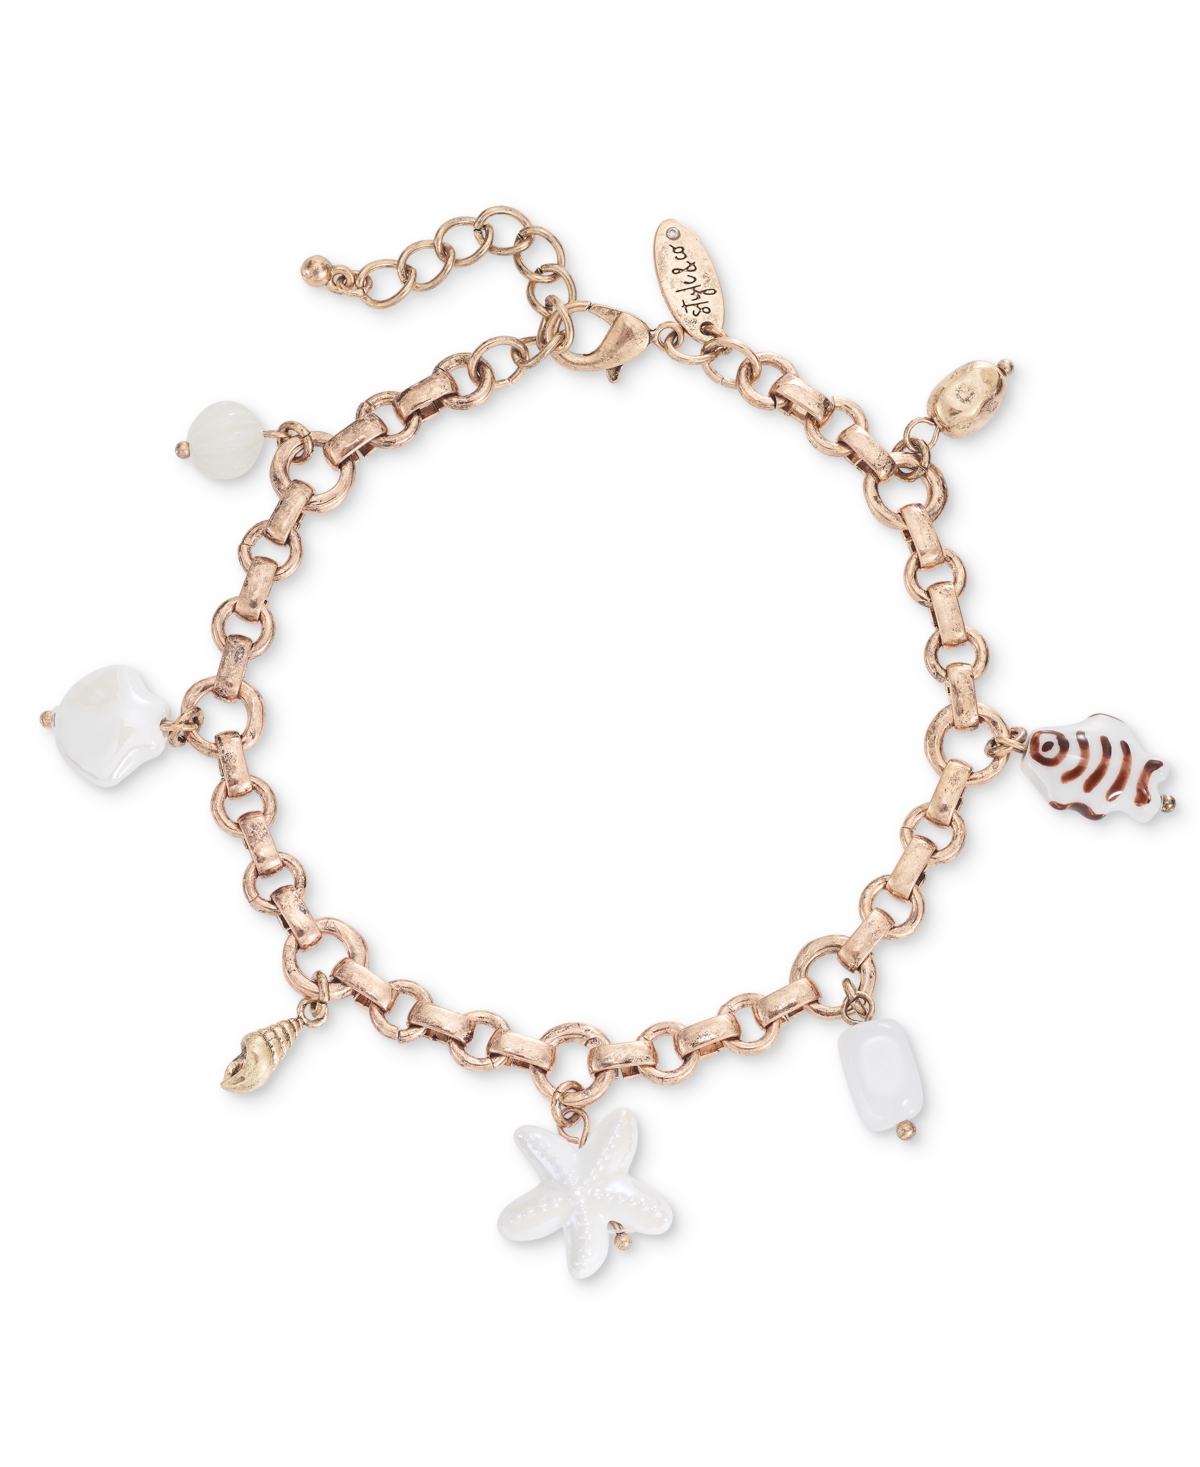 Mixed Bead & Stone Sea Charm Ankle Bracelet, Created for Macy's - Blue